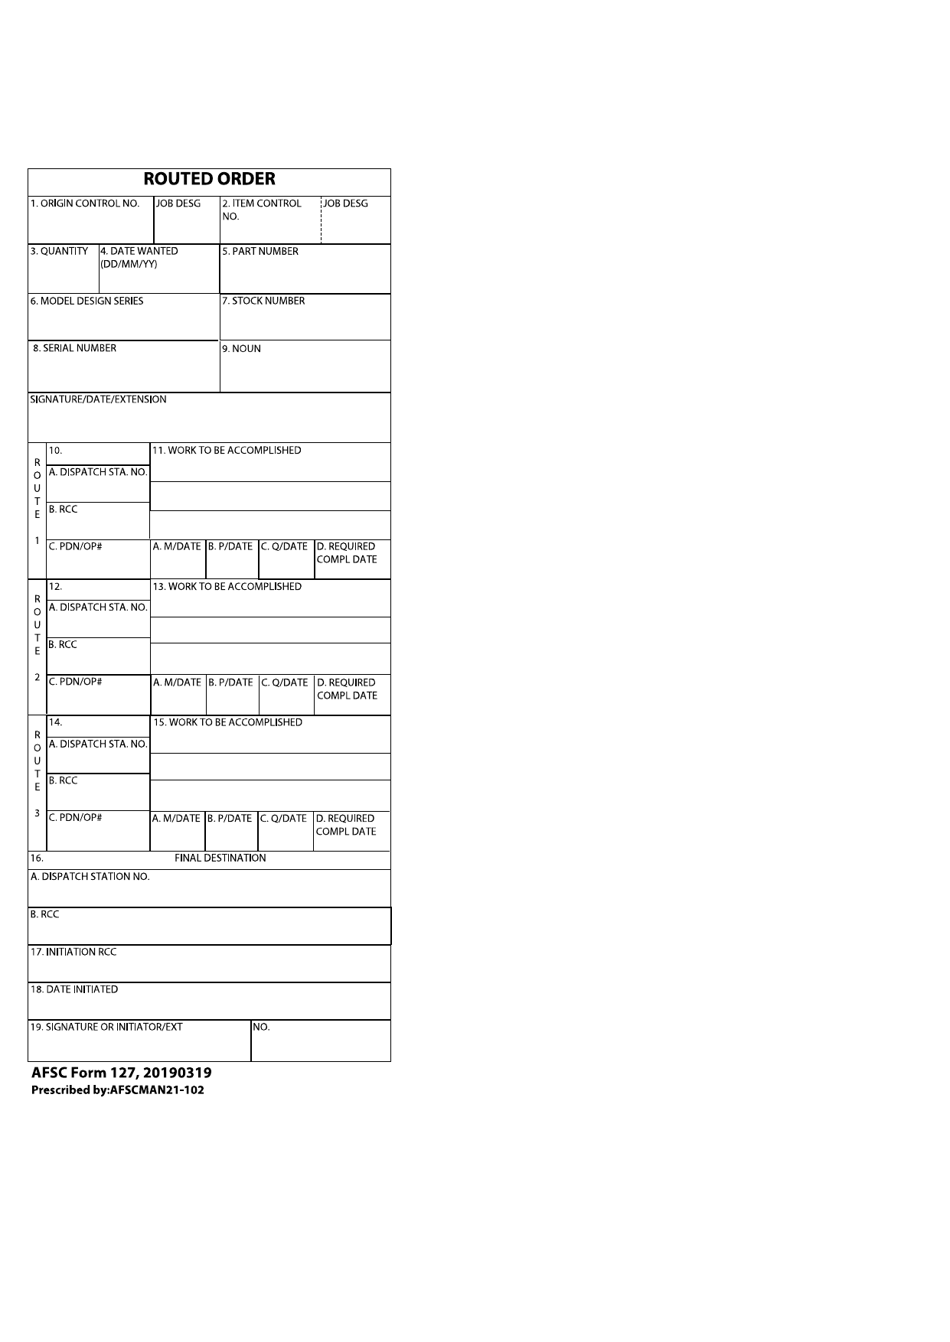 AFSC Form 127 Routed Order, Page 1